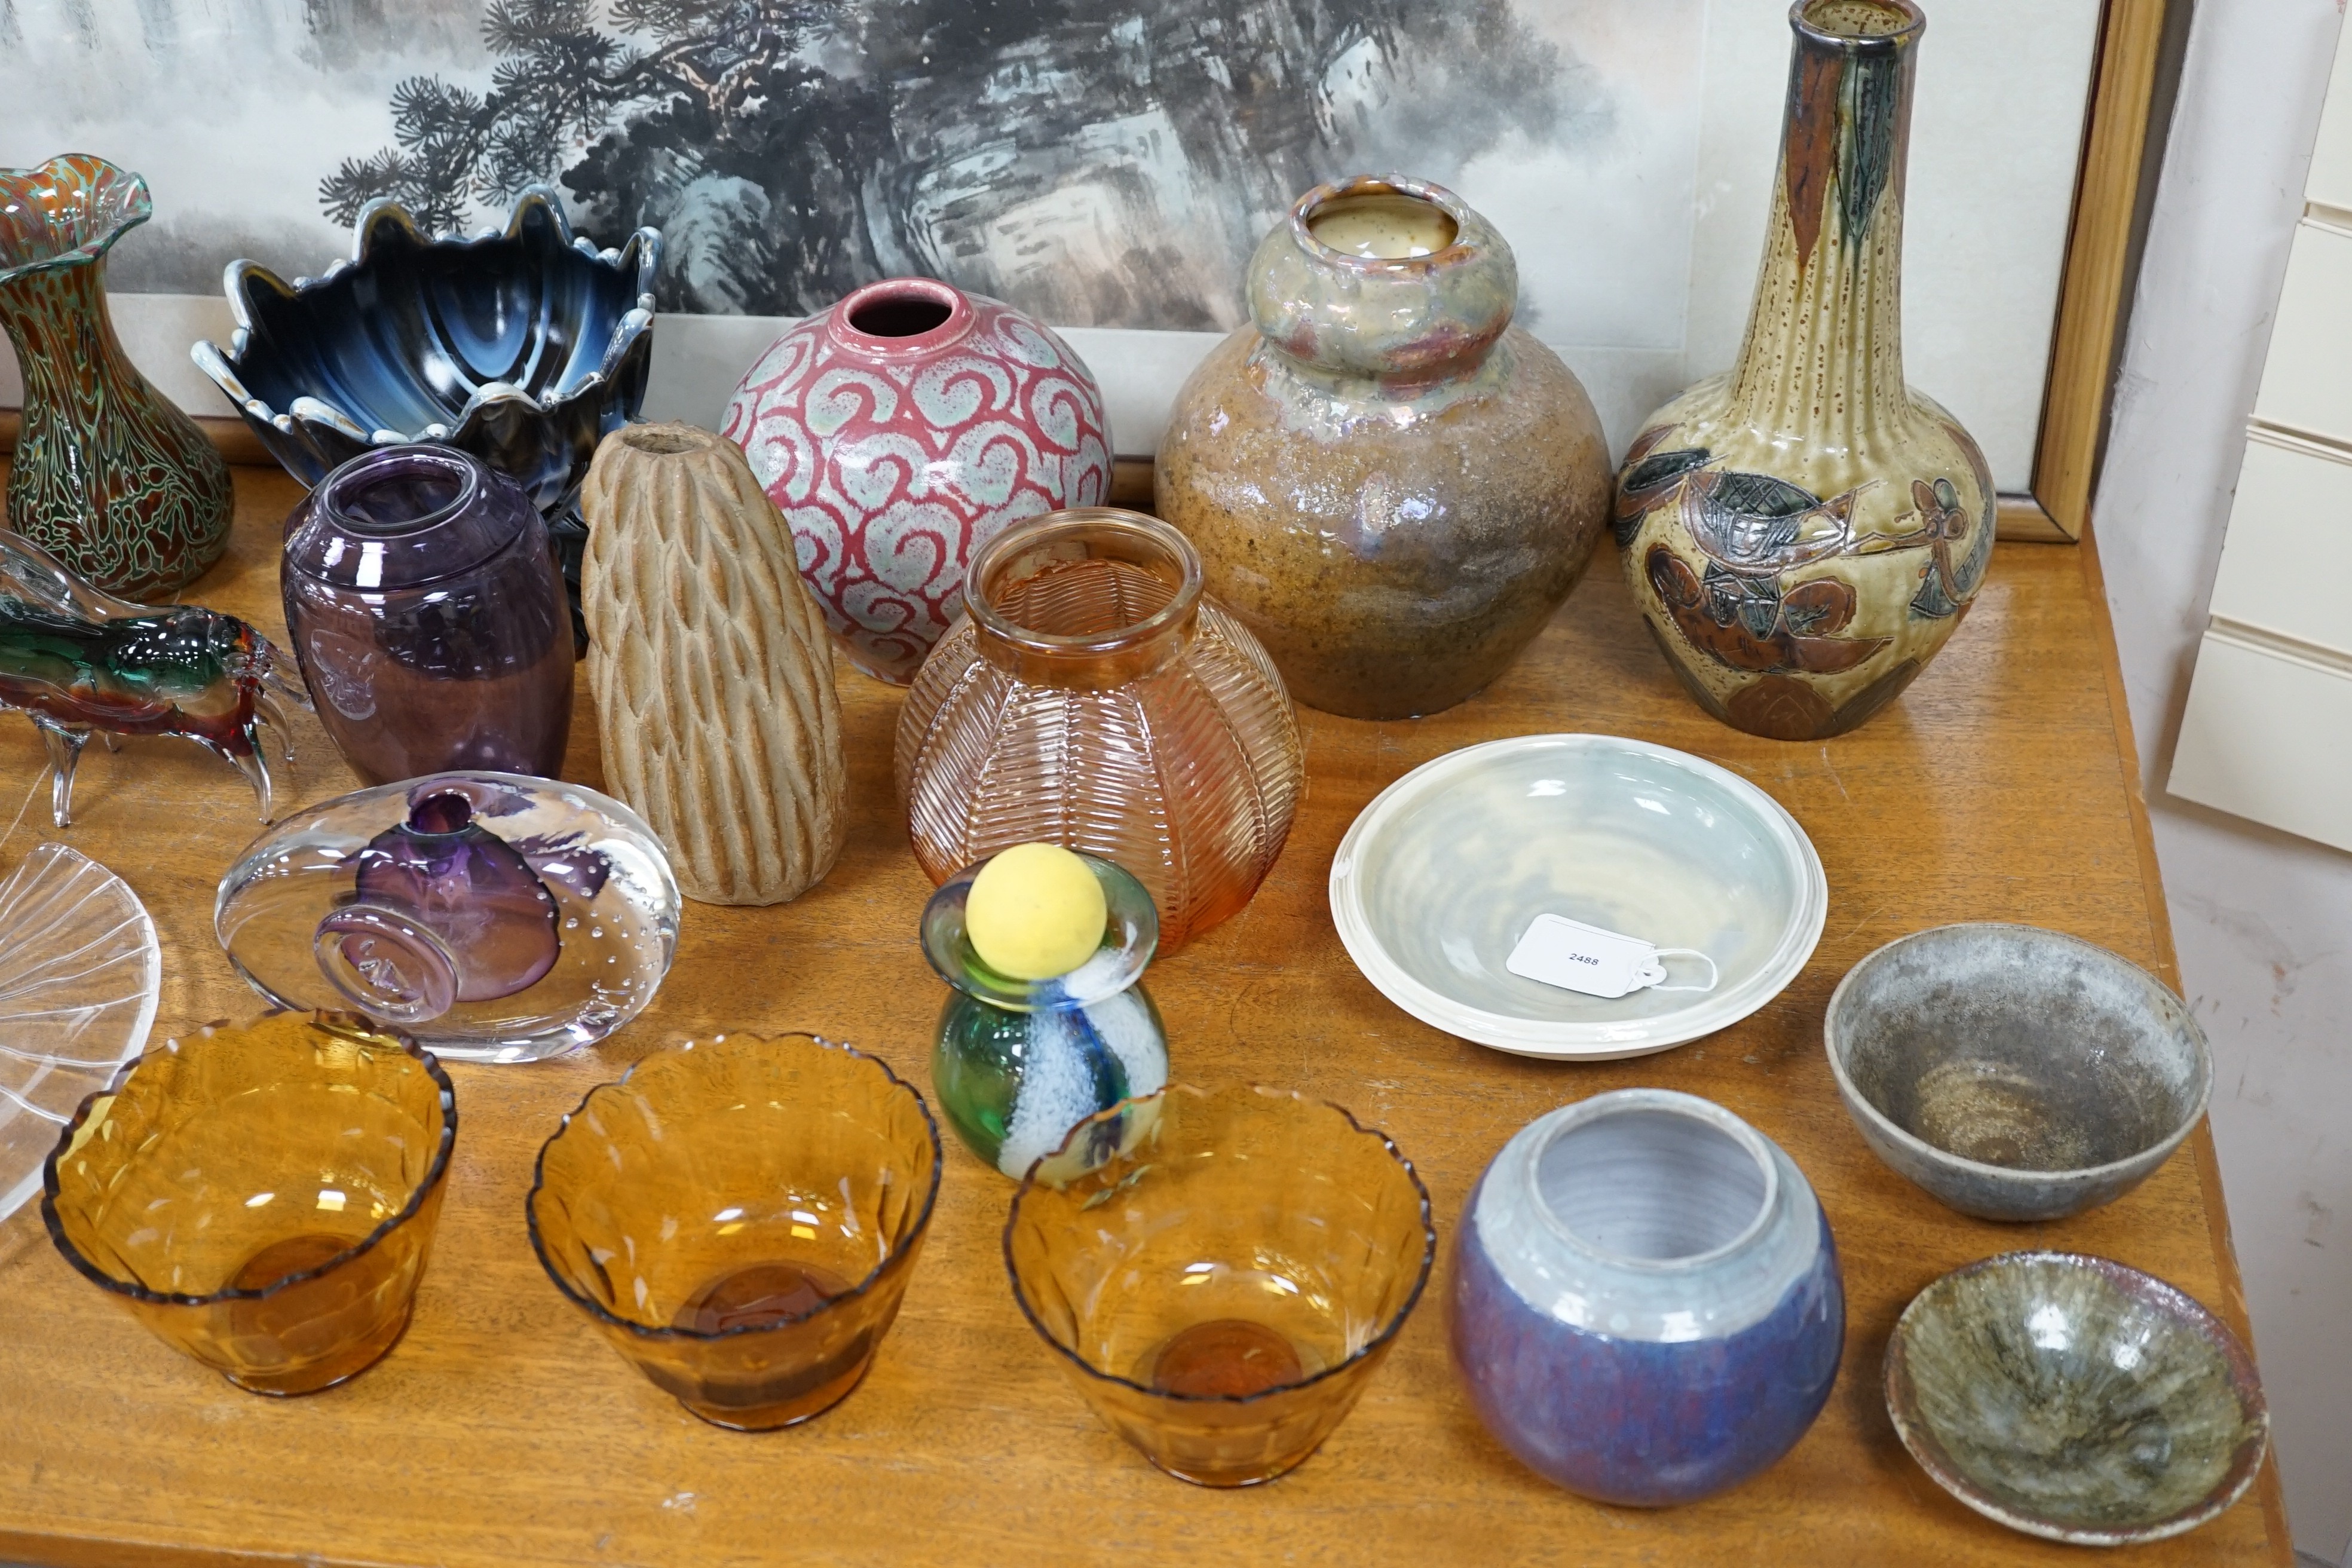 A group of 20th century Studio pottery and glassware